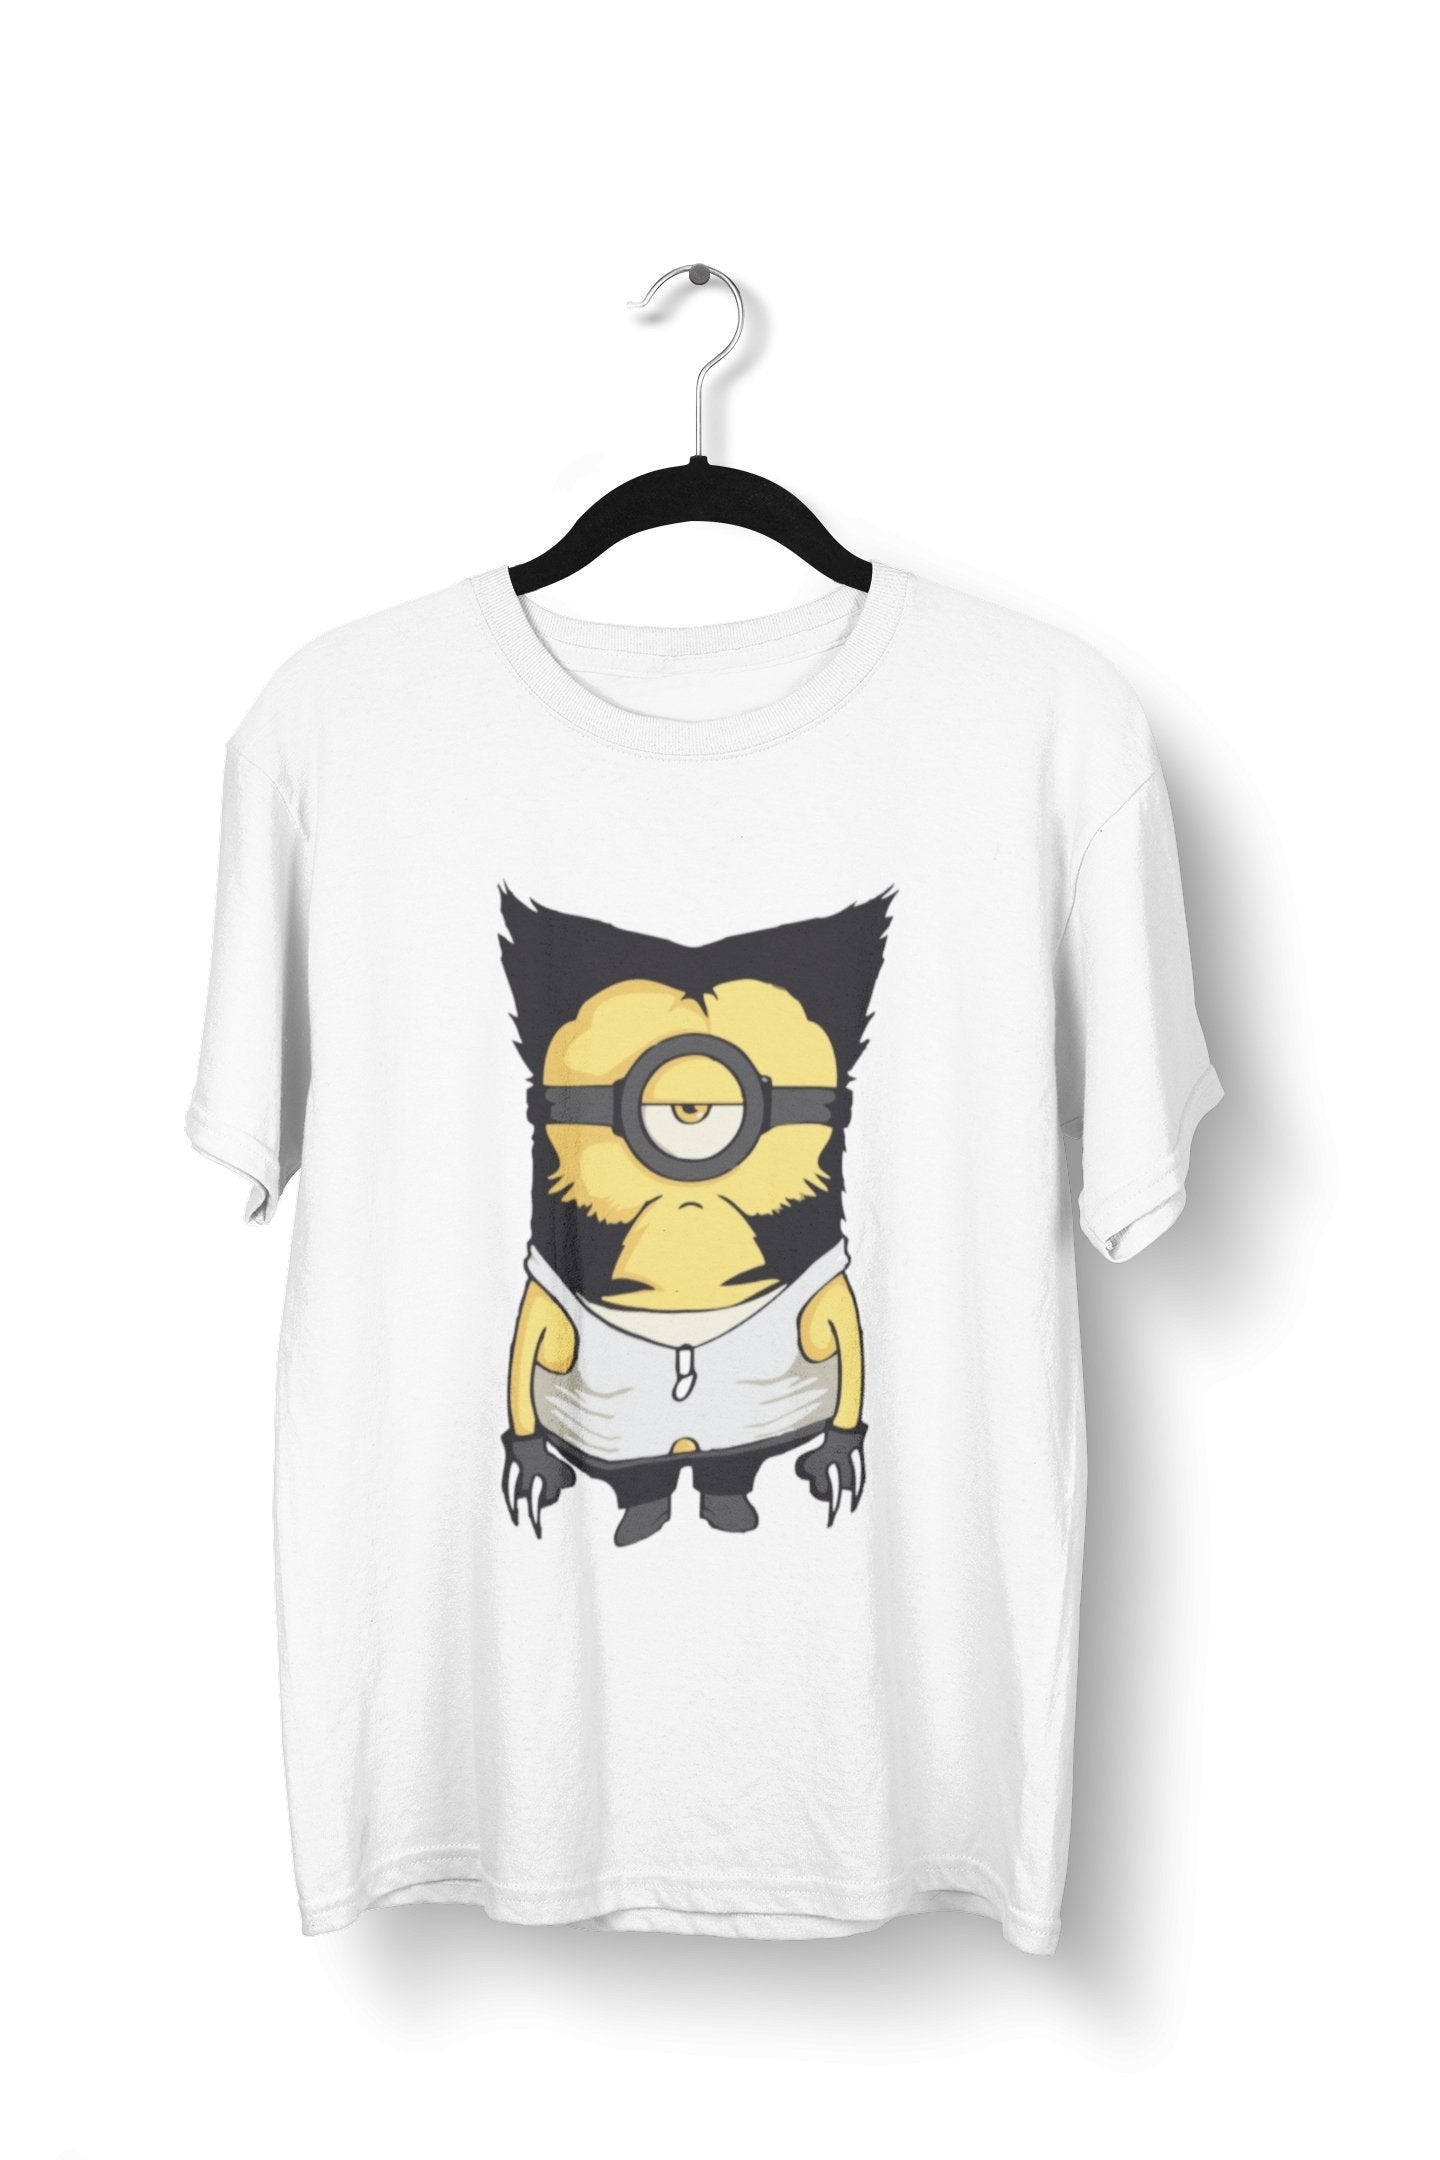 thelegalgang,Wolverine Minion Graphic T-Shirt for Men,.